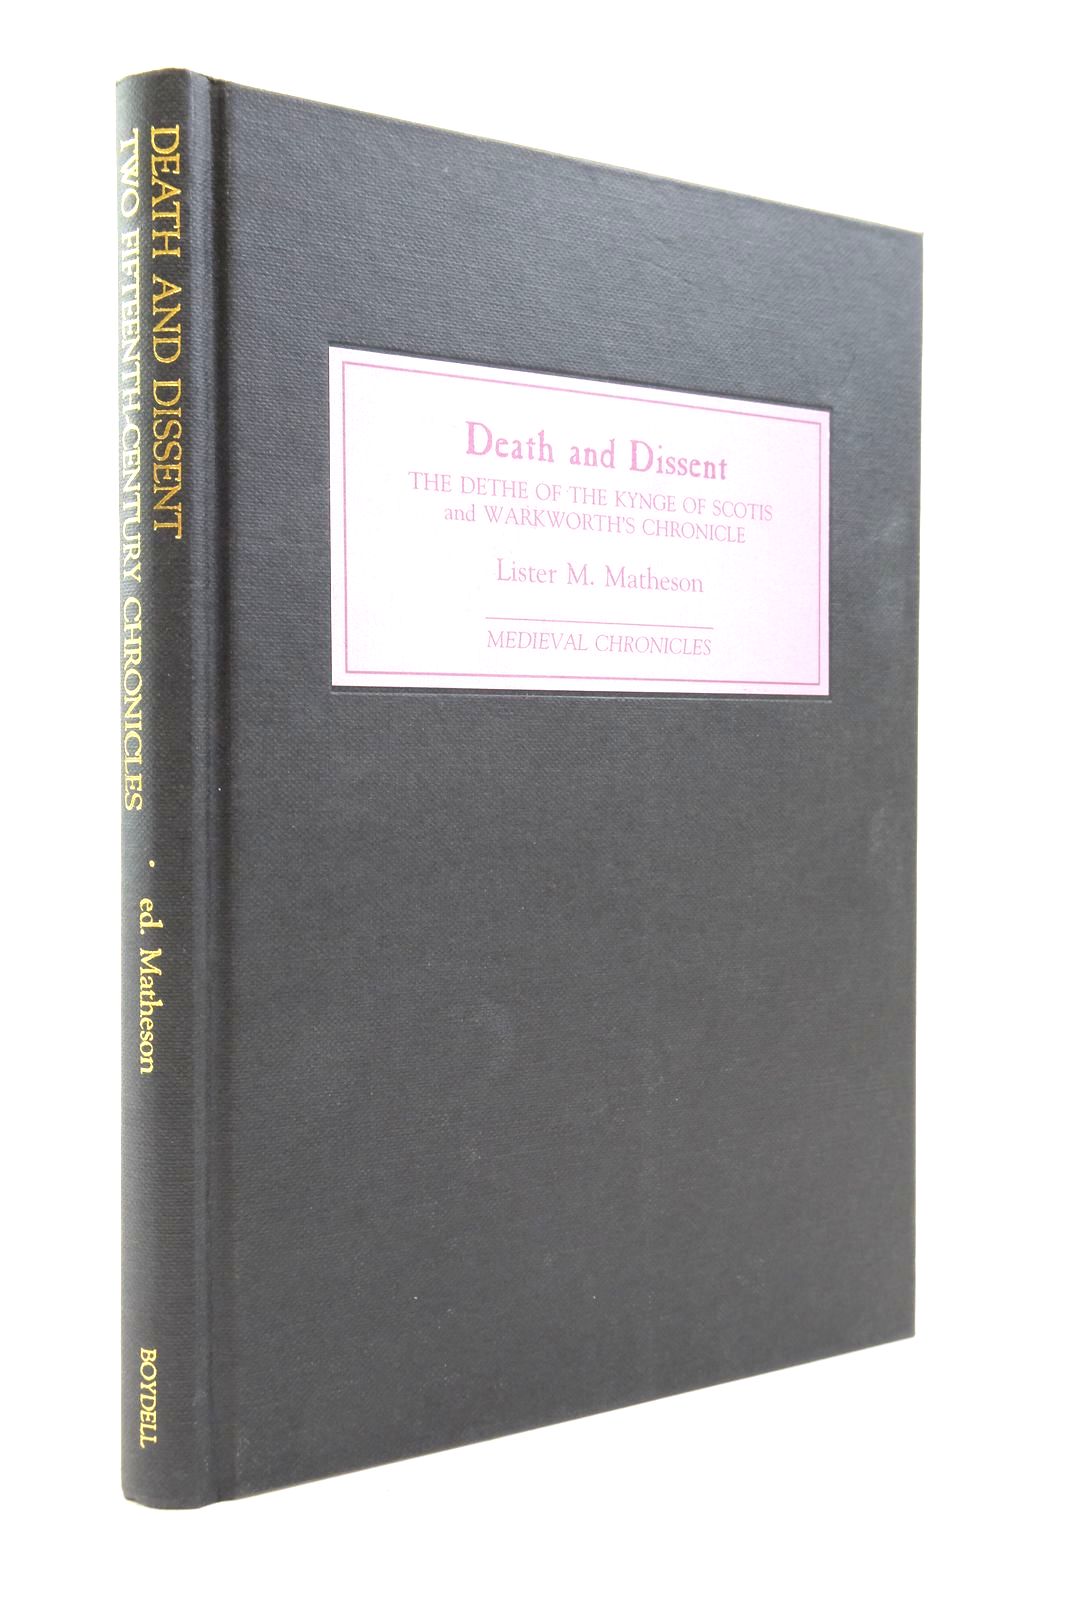 Photo of DEATH AND DISSENT: TWO FIFTEENTH CENTURY CHRONICLES written by Matheson, Lister M. published by The Boydell Press (STOCK CODE: 2138960)  for sale by Stella & Rose's Books